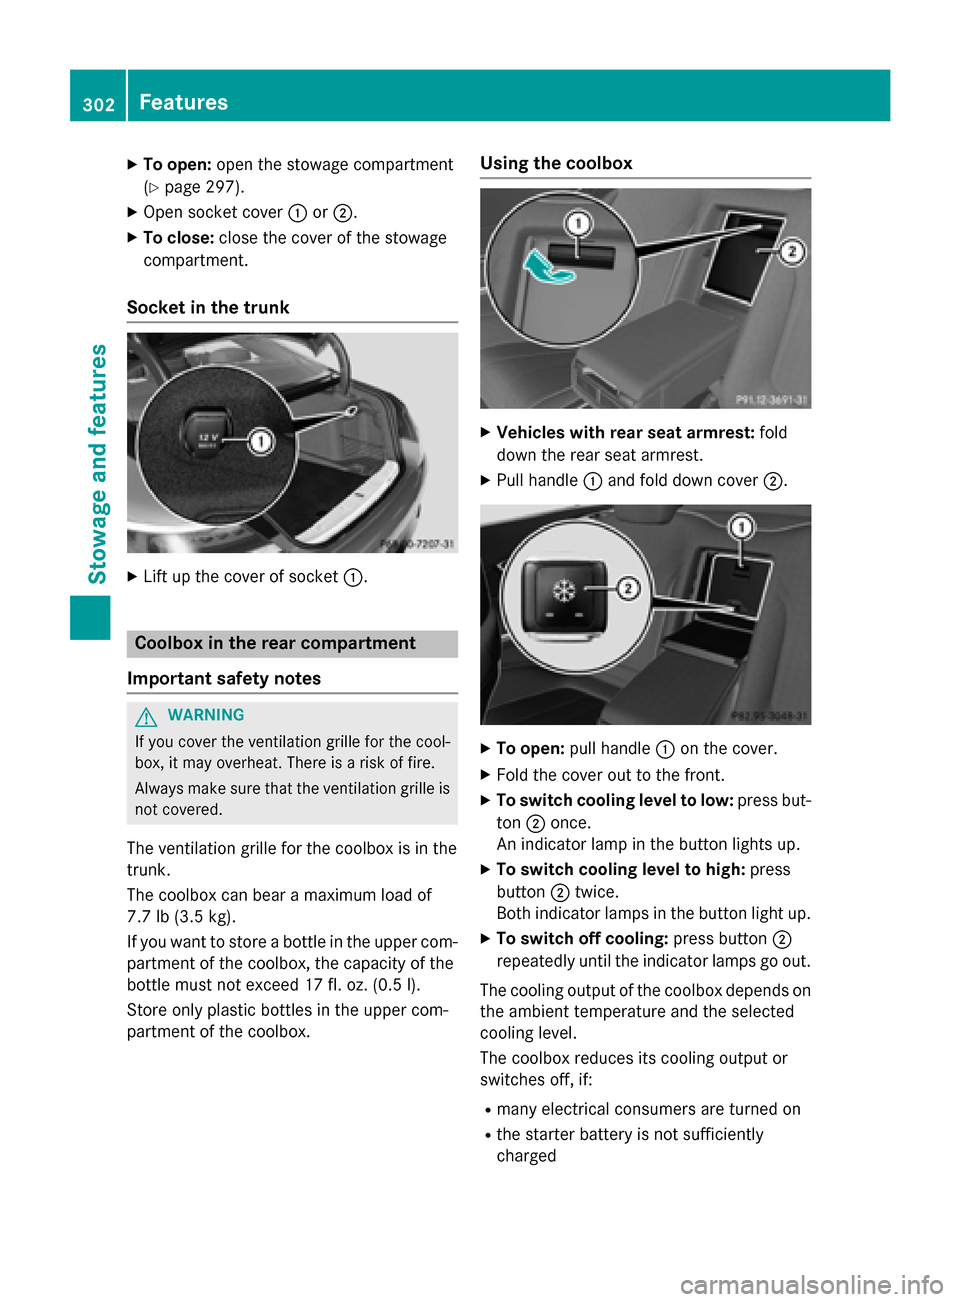 MERCEDES-BENZ S-Class COUPE 2015 C217 Owners Guide X
To open: open the stowage compartment
(Y page 297).
X Open socket cover 0043or0044.
X To close: close the cover of the stowage
compartment.
Socket in the trunk X
Lift up the cover of socket 0043.Coo